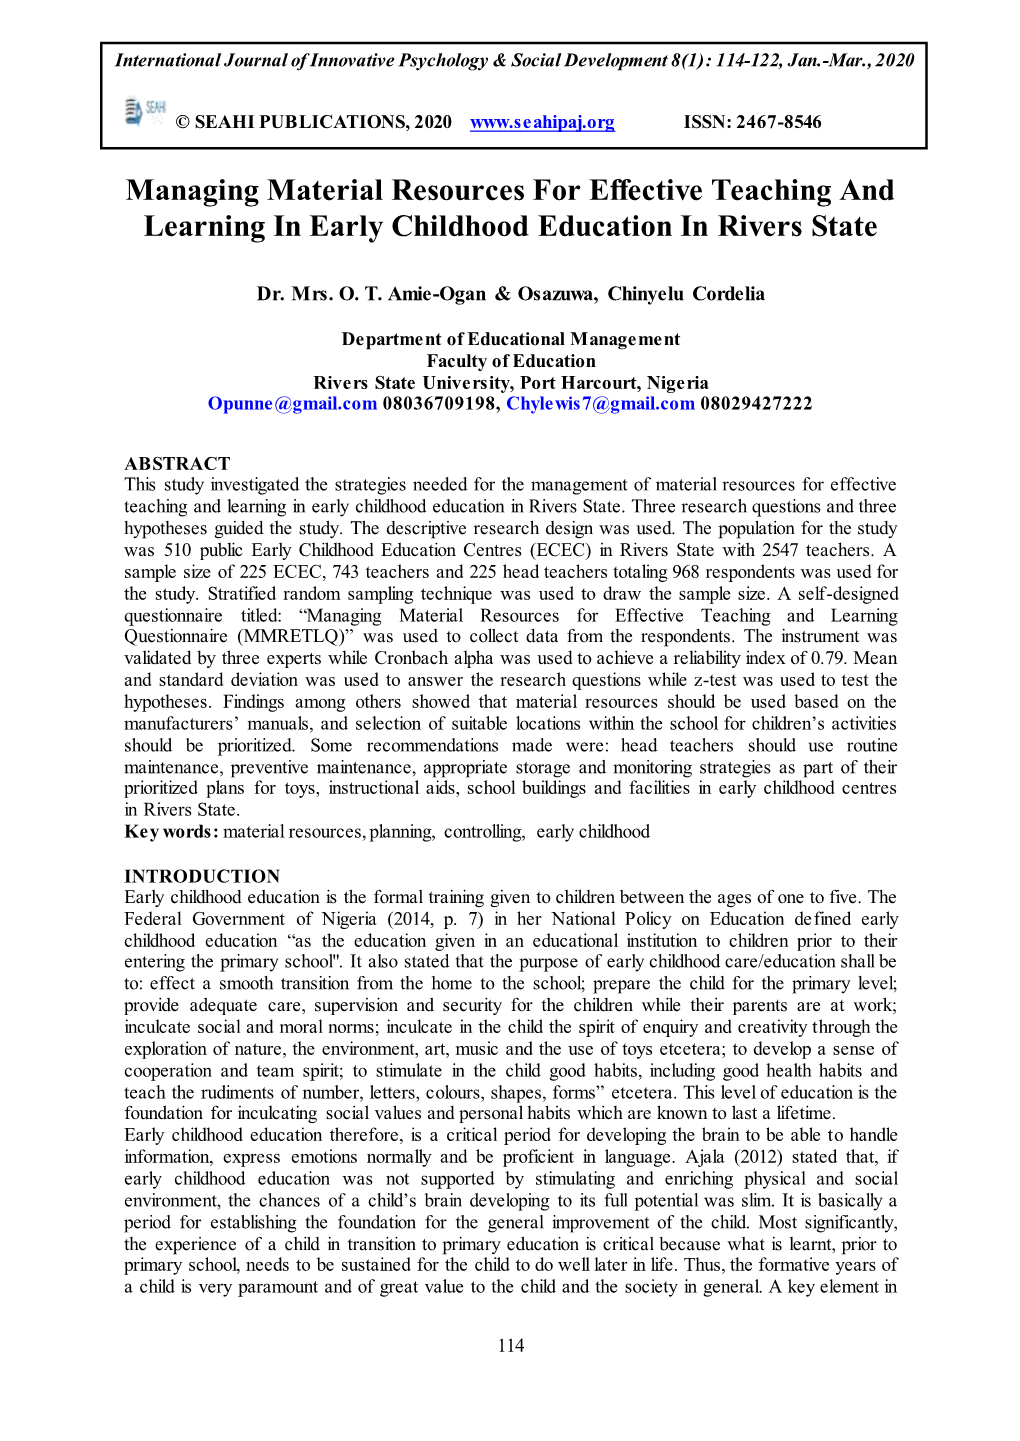 Managing Material Resources for Effective Teaching and Learning in Early Childhood Education in Rivers State